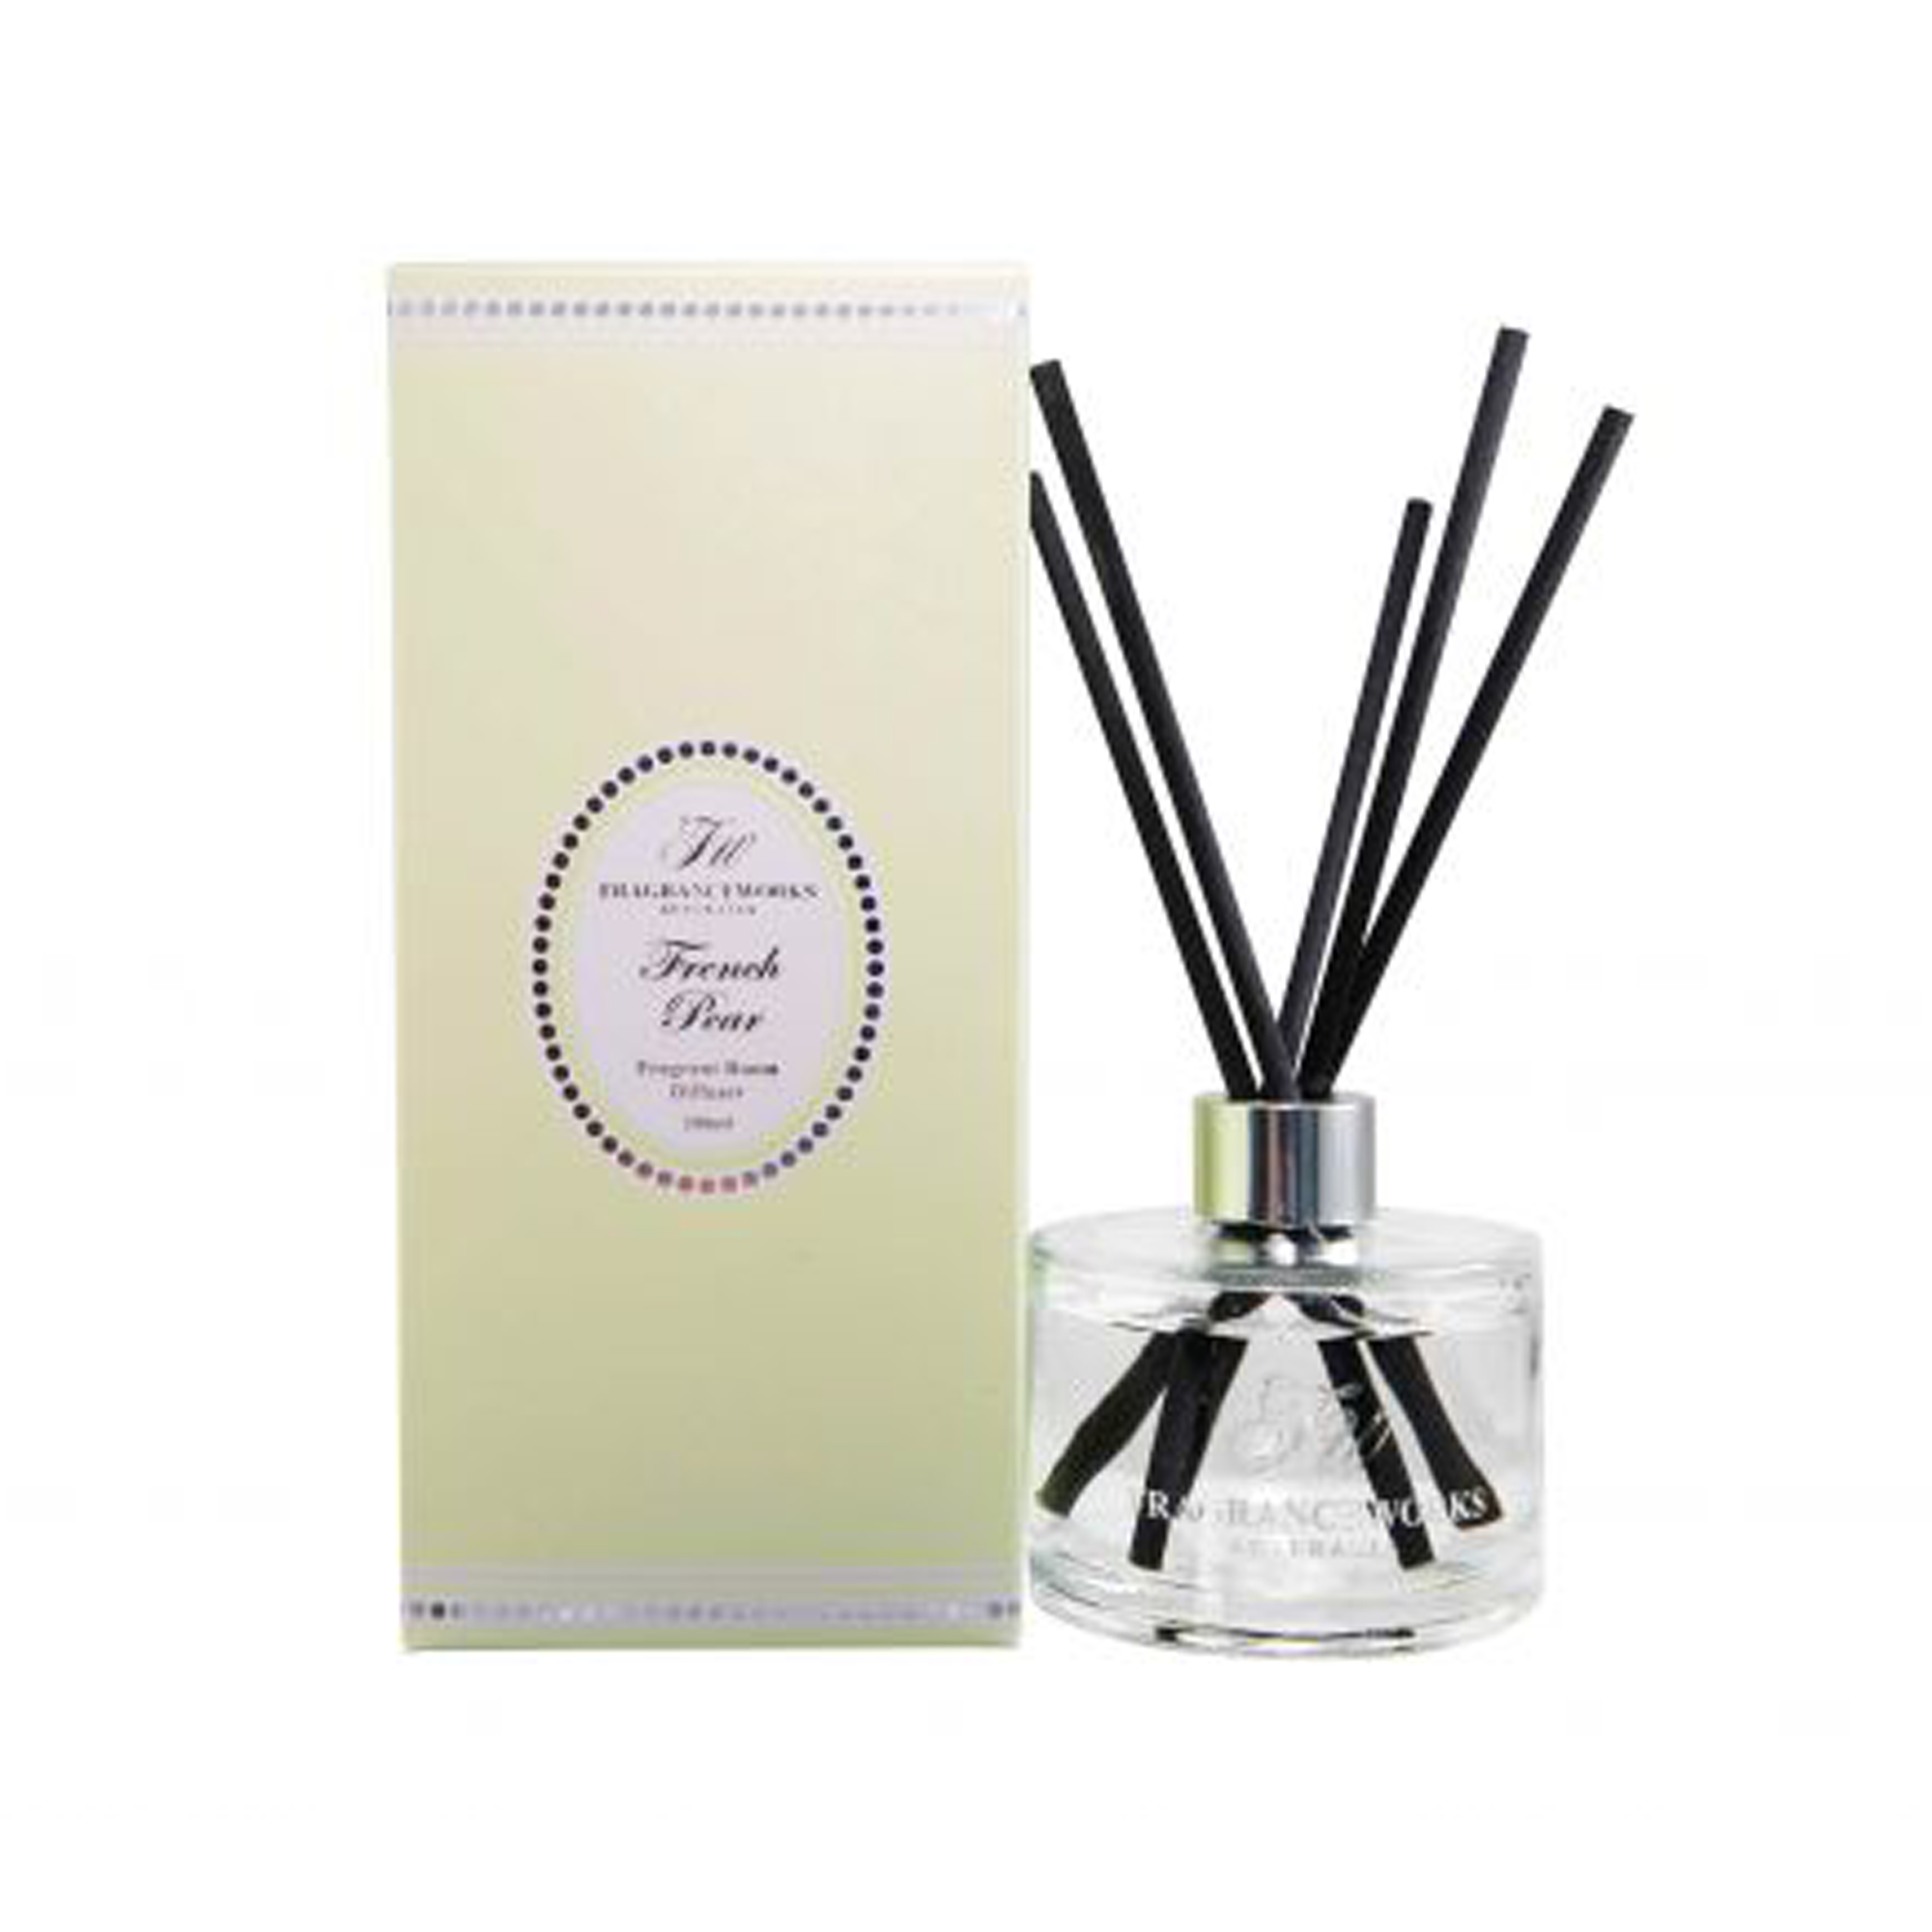 French Pear Diffuser